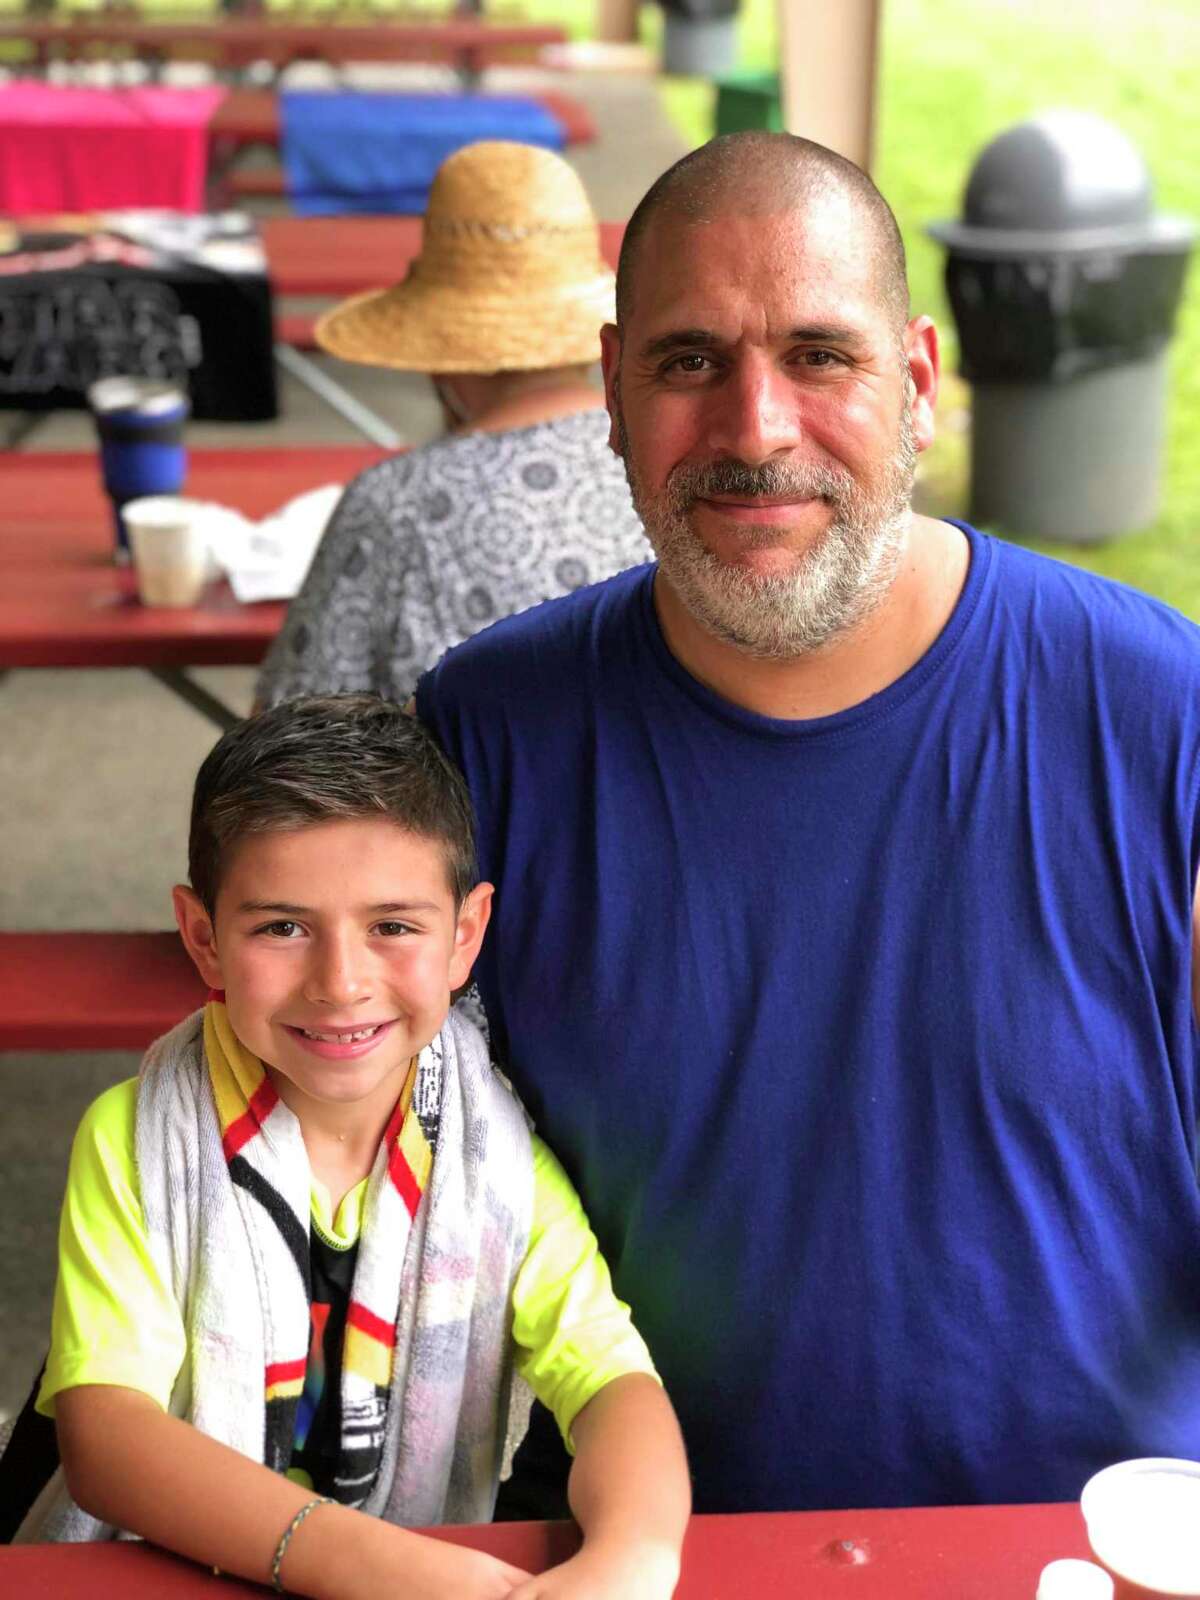 9-year-old Nicholas Zaccagno, and his dad, Dino Zaccagno, started a YouTube series where Nicholas reviews food from local restaurants to encourage people to support the restaurants.